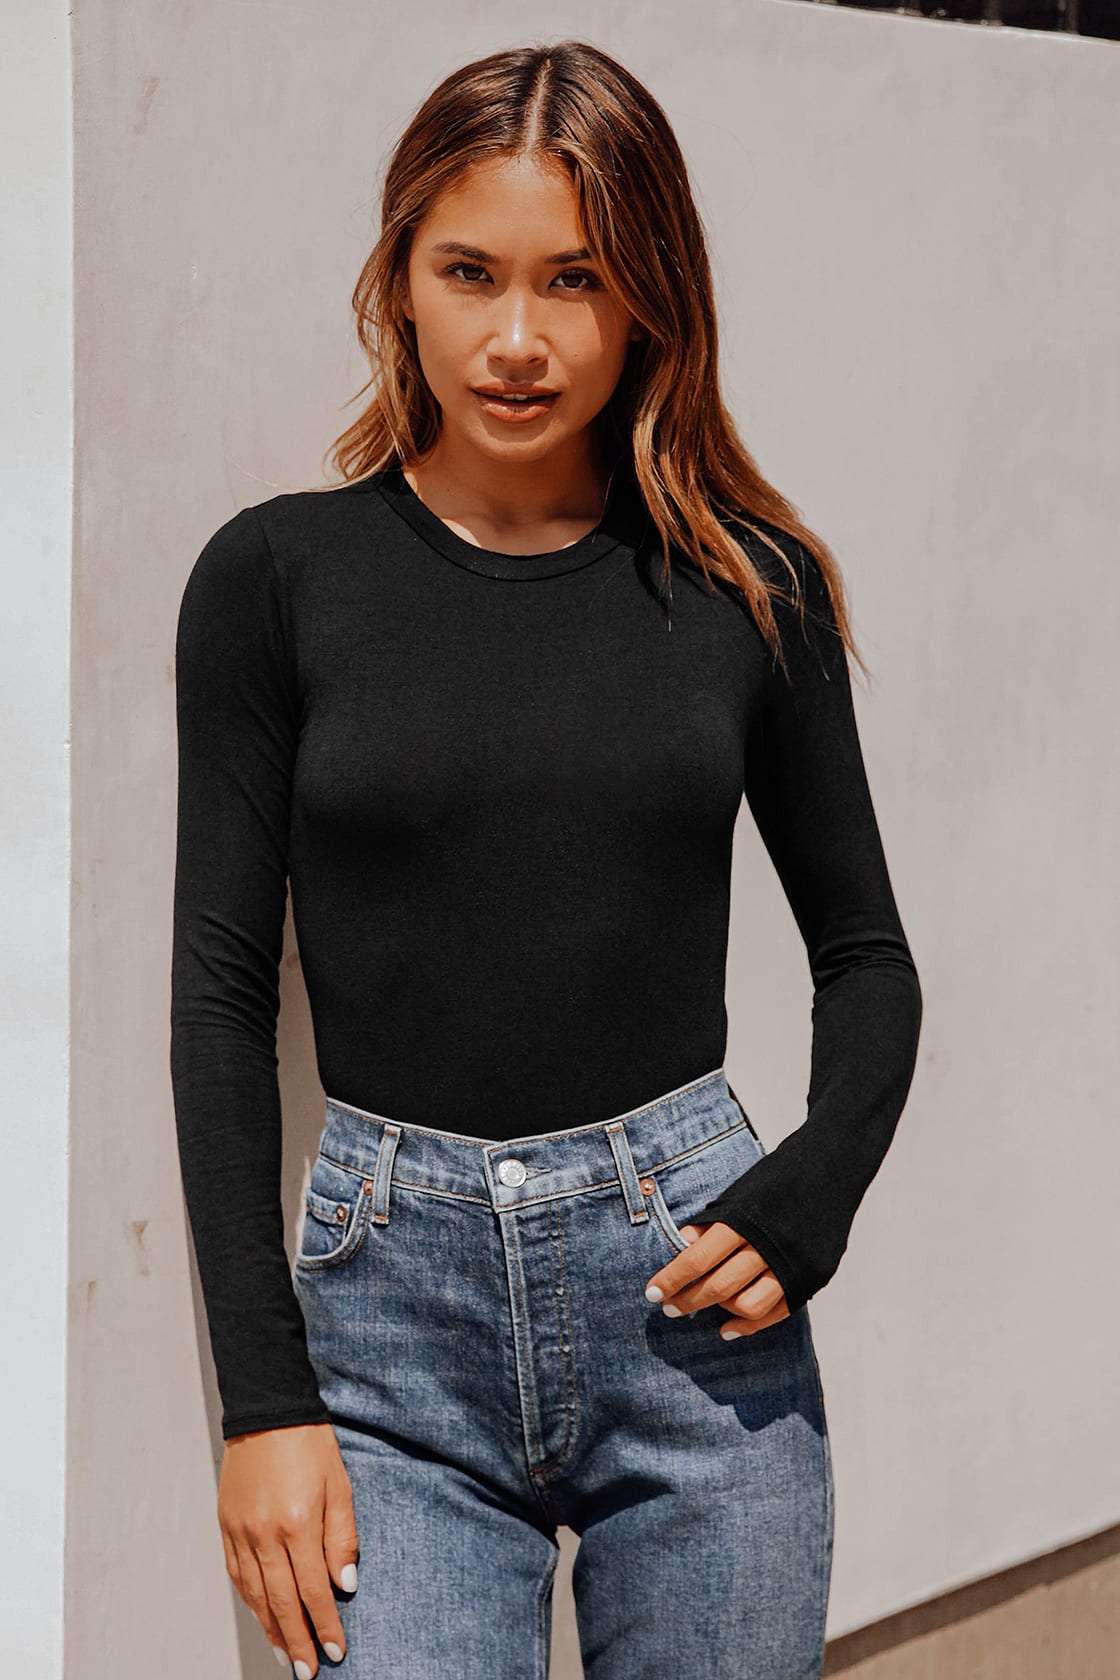 bodysuit with jeans outfits